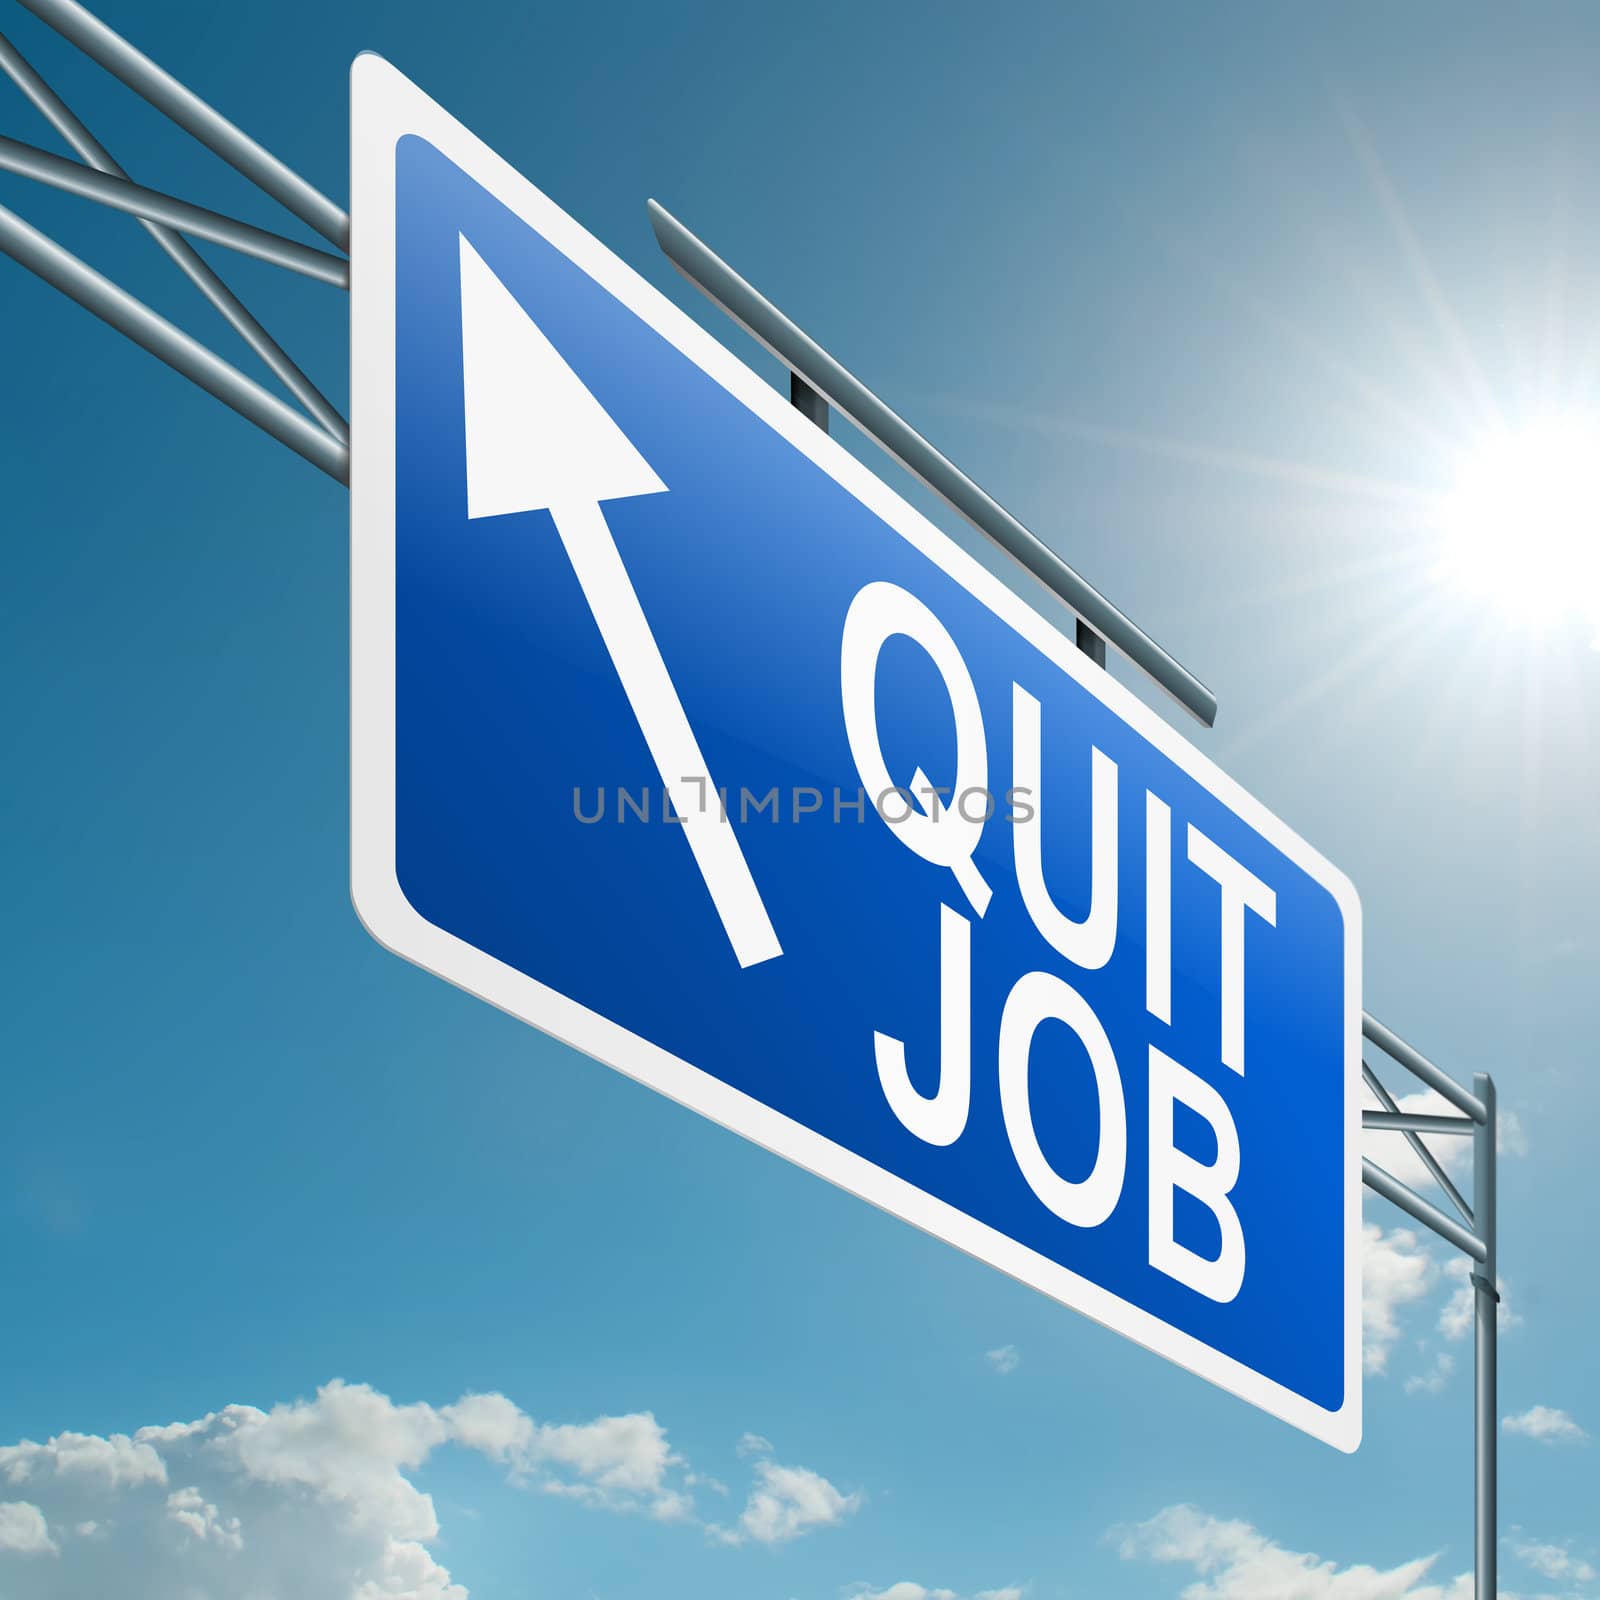 Illustration depicting a highway gantry sign with a quit job concept. Blue sky background.